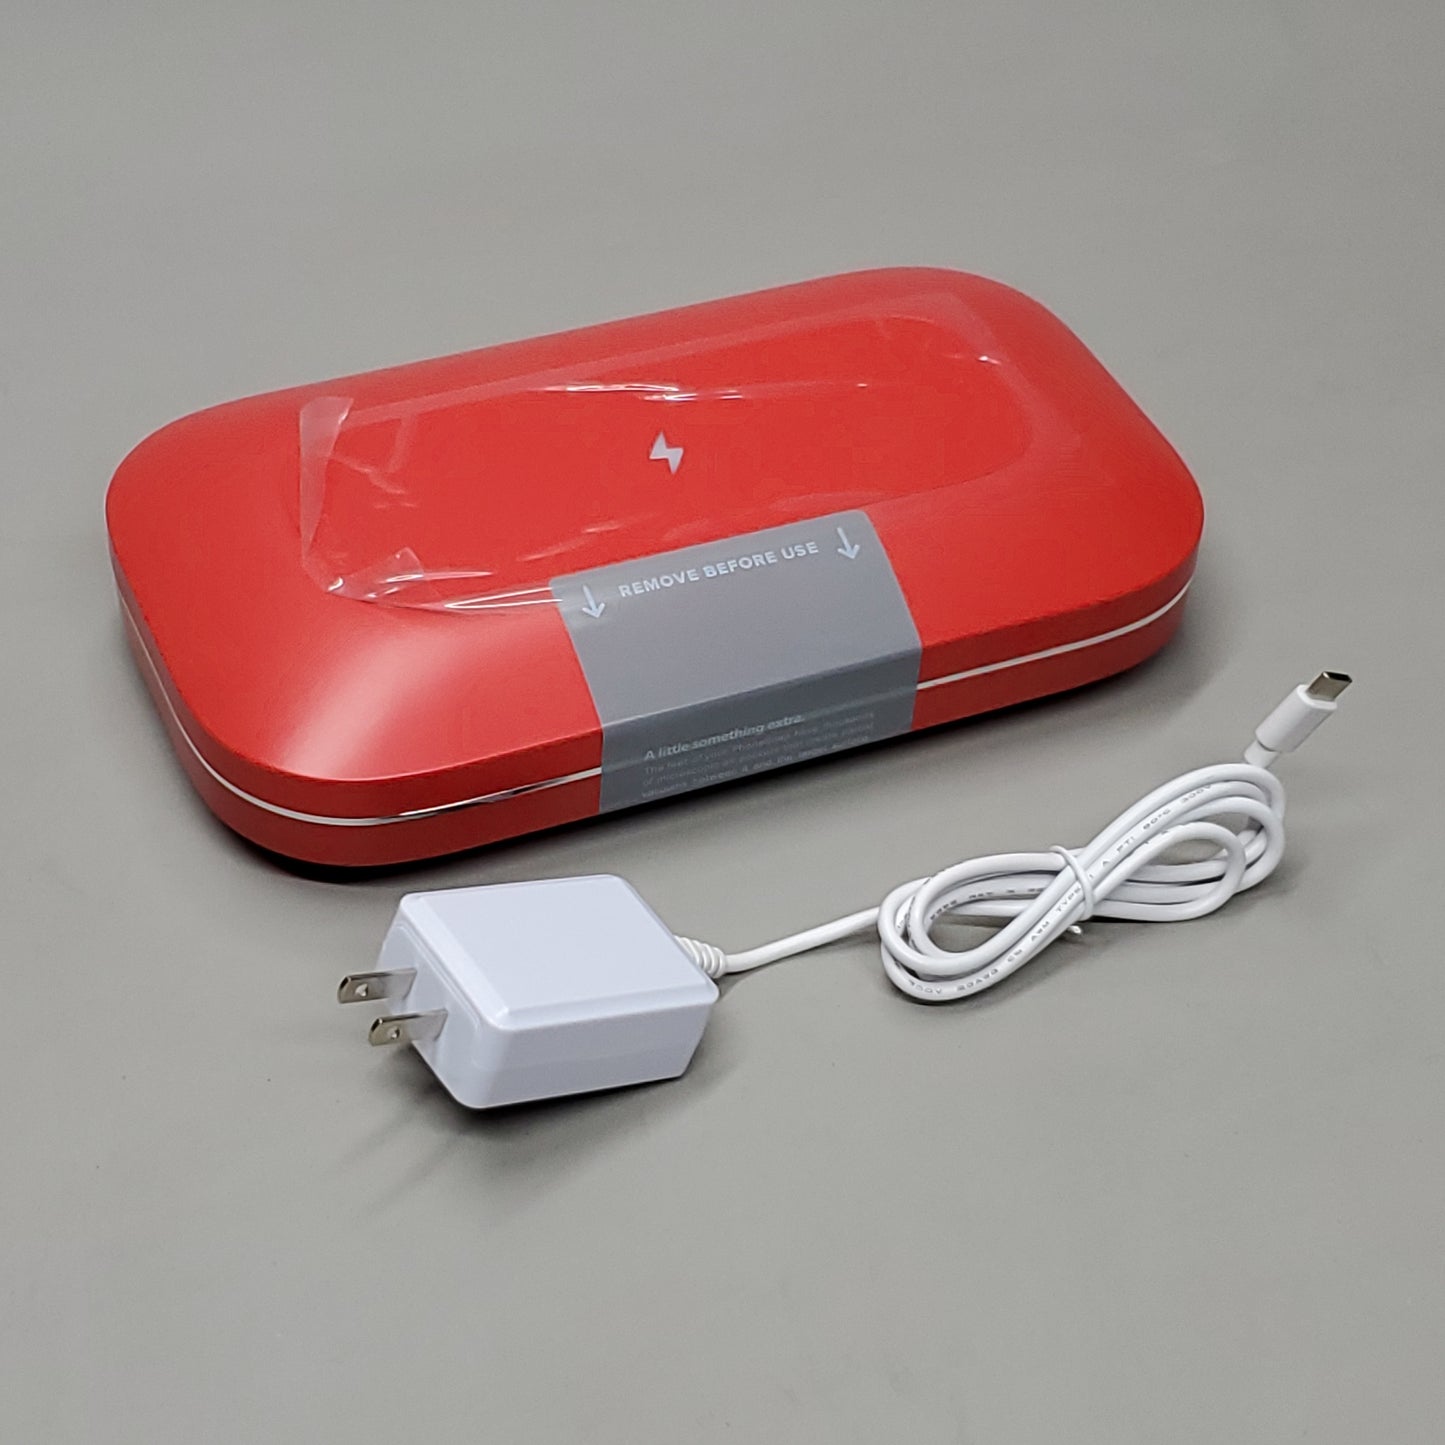 PHONESOAP PRO Rapid UV Sanitizer and Charger Red PSPROV1R (New)